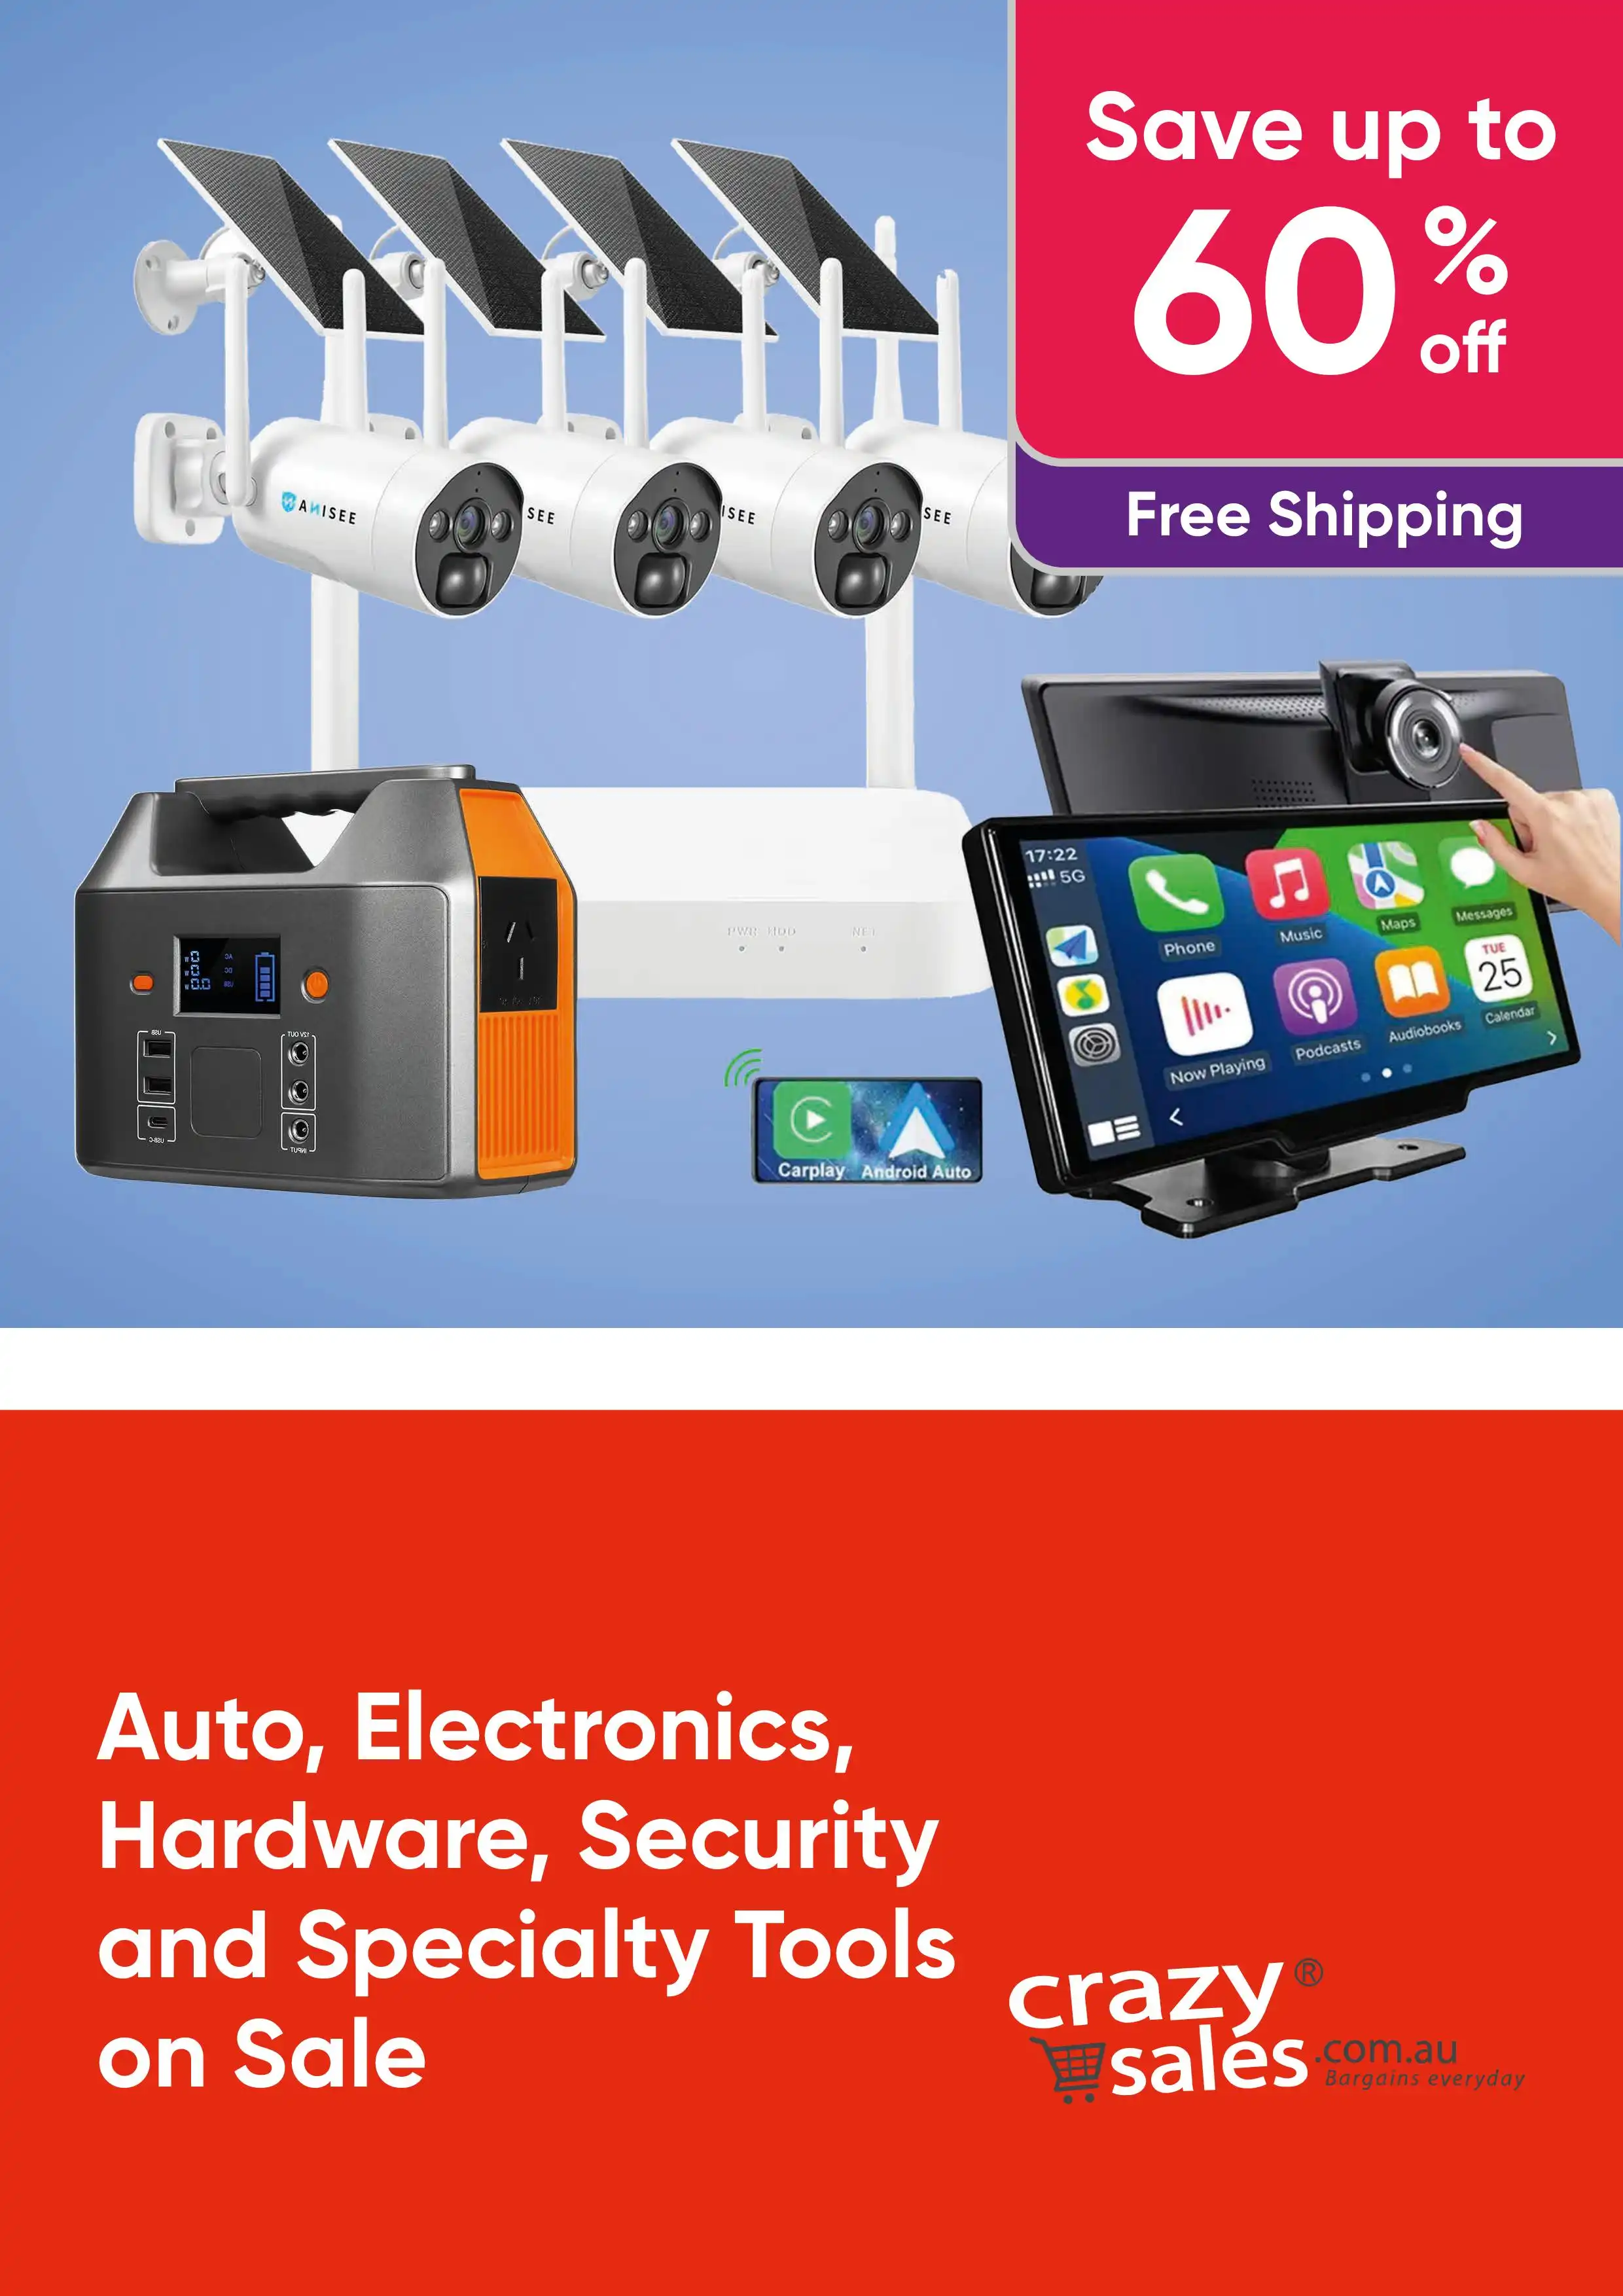 Save Up To 60% Off Auto, Electronics, Hardware, Security and Specialty Tools